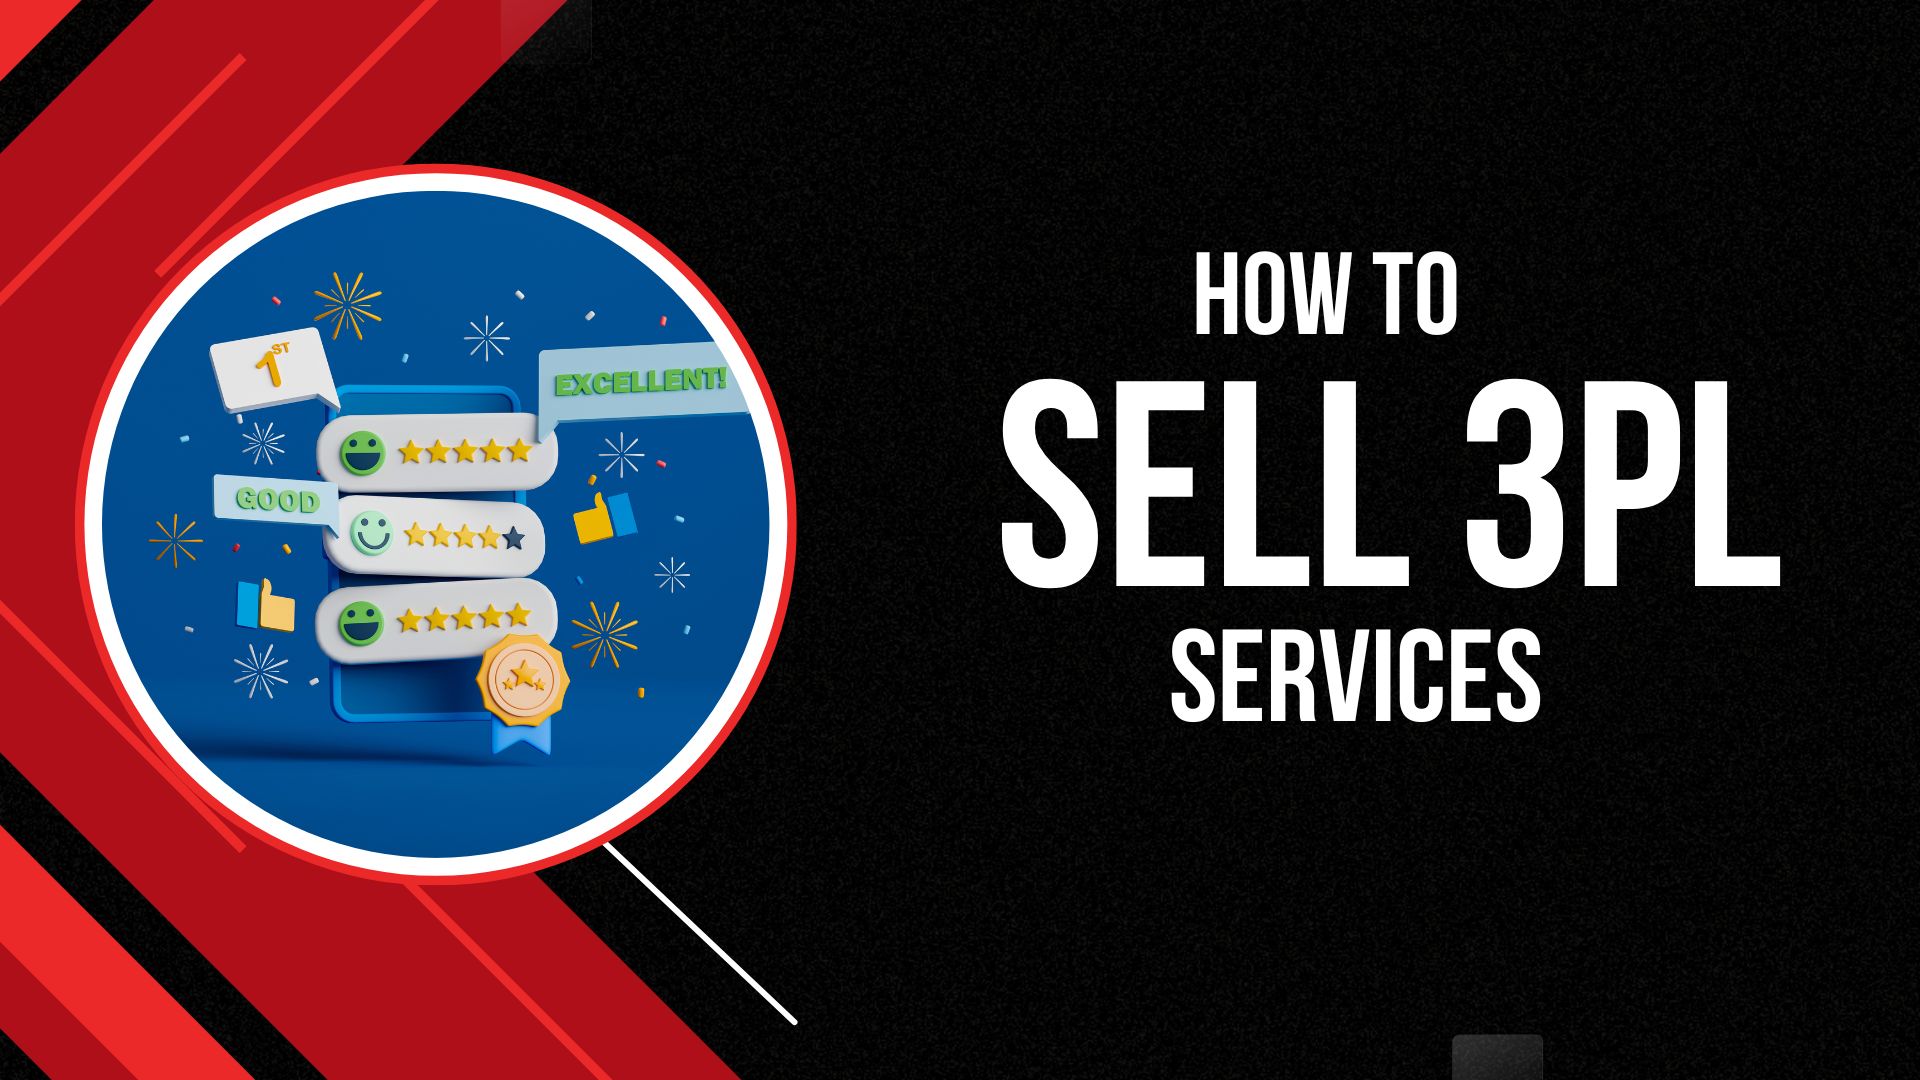 Sell 3Pl Services